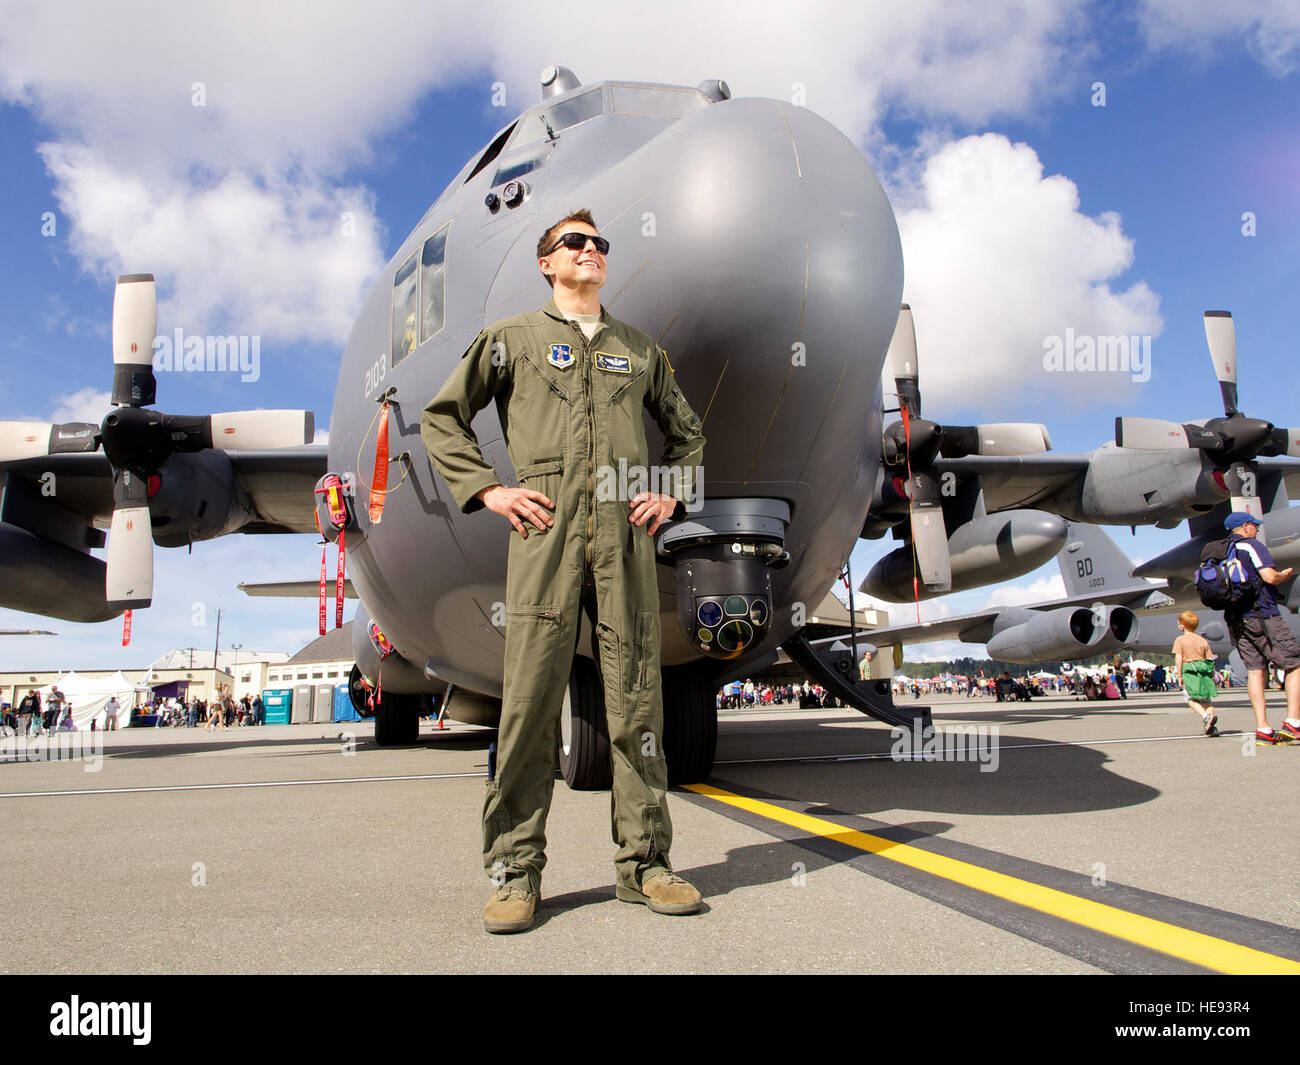 Air National Guard Master Sgt. Ryan Conti, a flight engineer with the 211th Rescue Squadron, stands with his C-130 King, July 26, 2014, during JBER's Arctic Thunder Open House. The C-130 King is a special variant of the transport aircraft suited to pararescue operations and is equipped to refuel other aircraft in flight from its wing pylon tanks. Conti is a native of Denver. The Arctic Thunder Open House features more than 40 Air Force, Army and civilian aerial acts, July 25-27, and has an expected crowd of more than 200,000 people. It is the largest two-day event in the state and one of the p Stock Photo